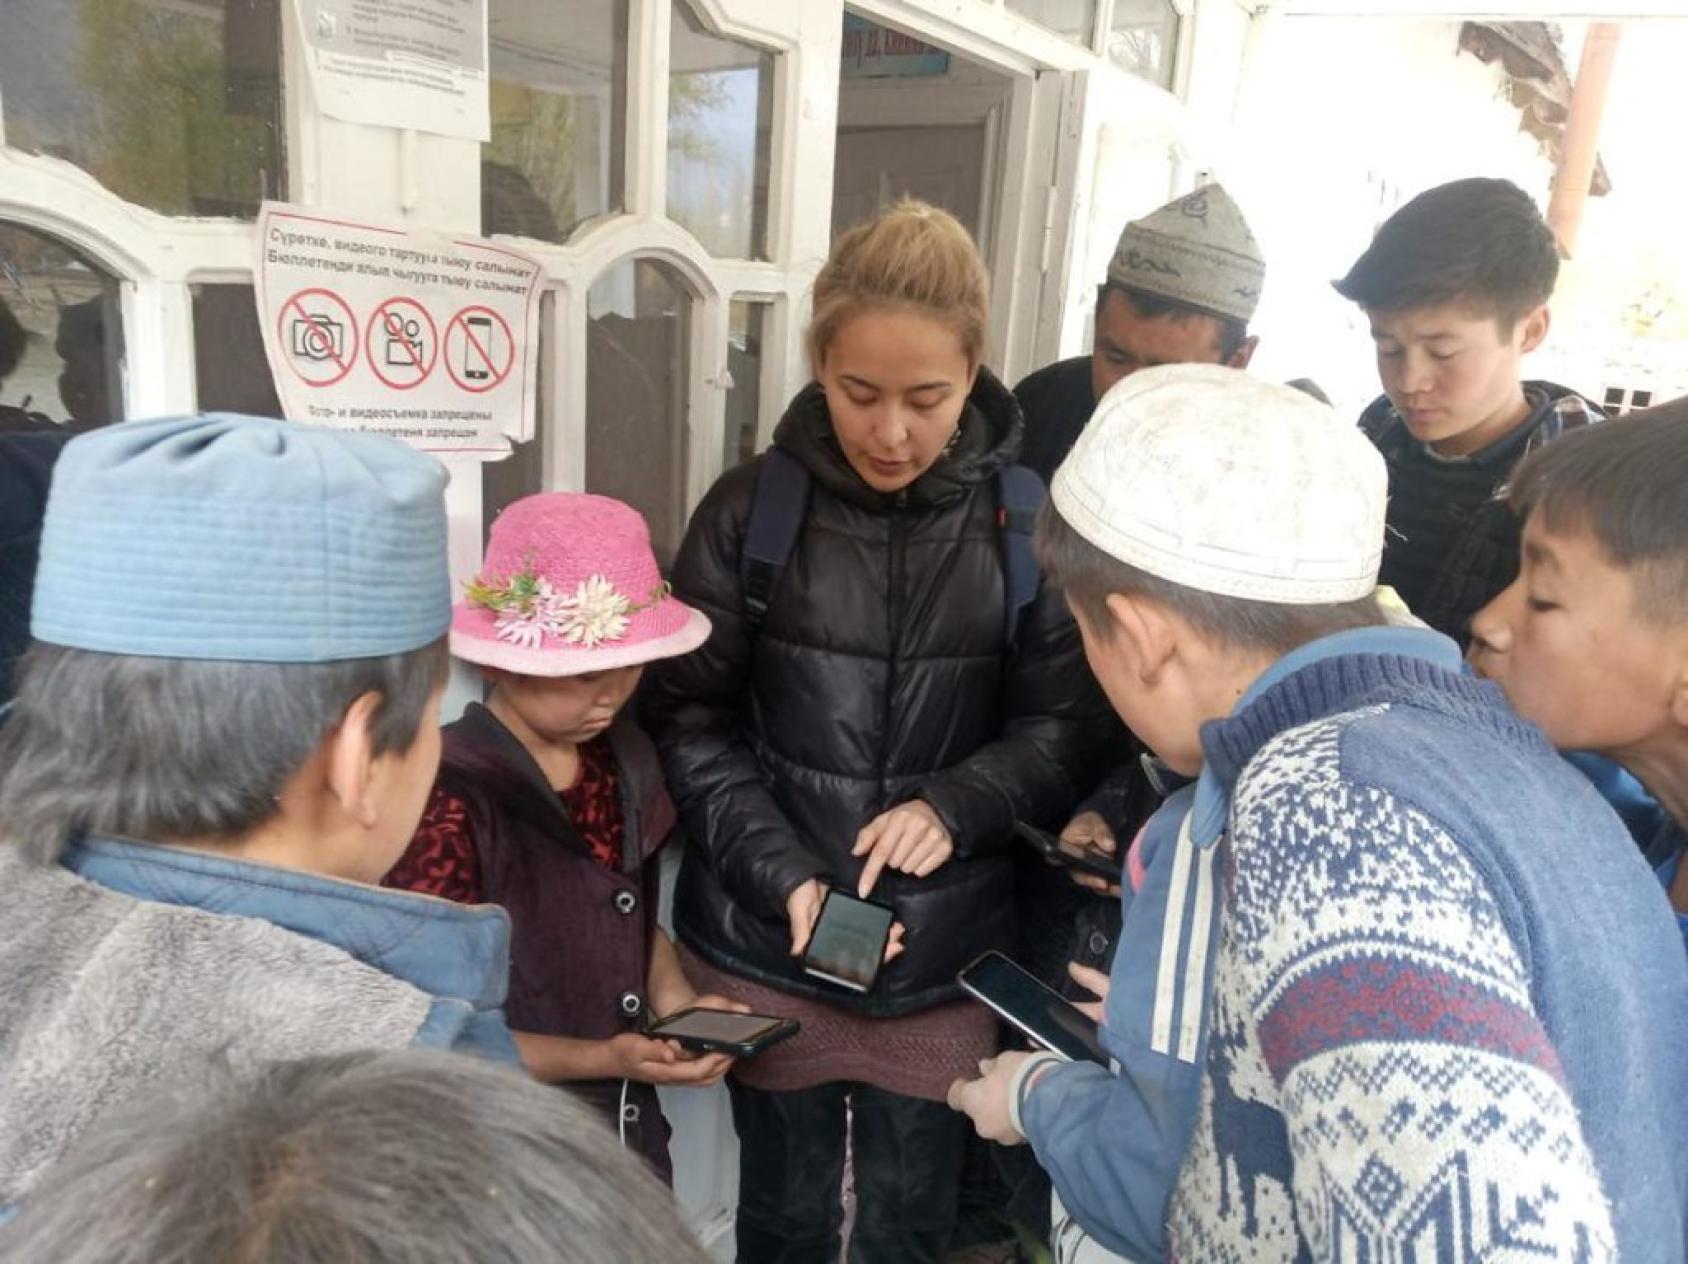 A woman explaining to the group of kids how to use a smartphone app. 